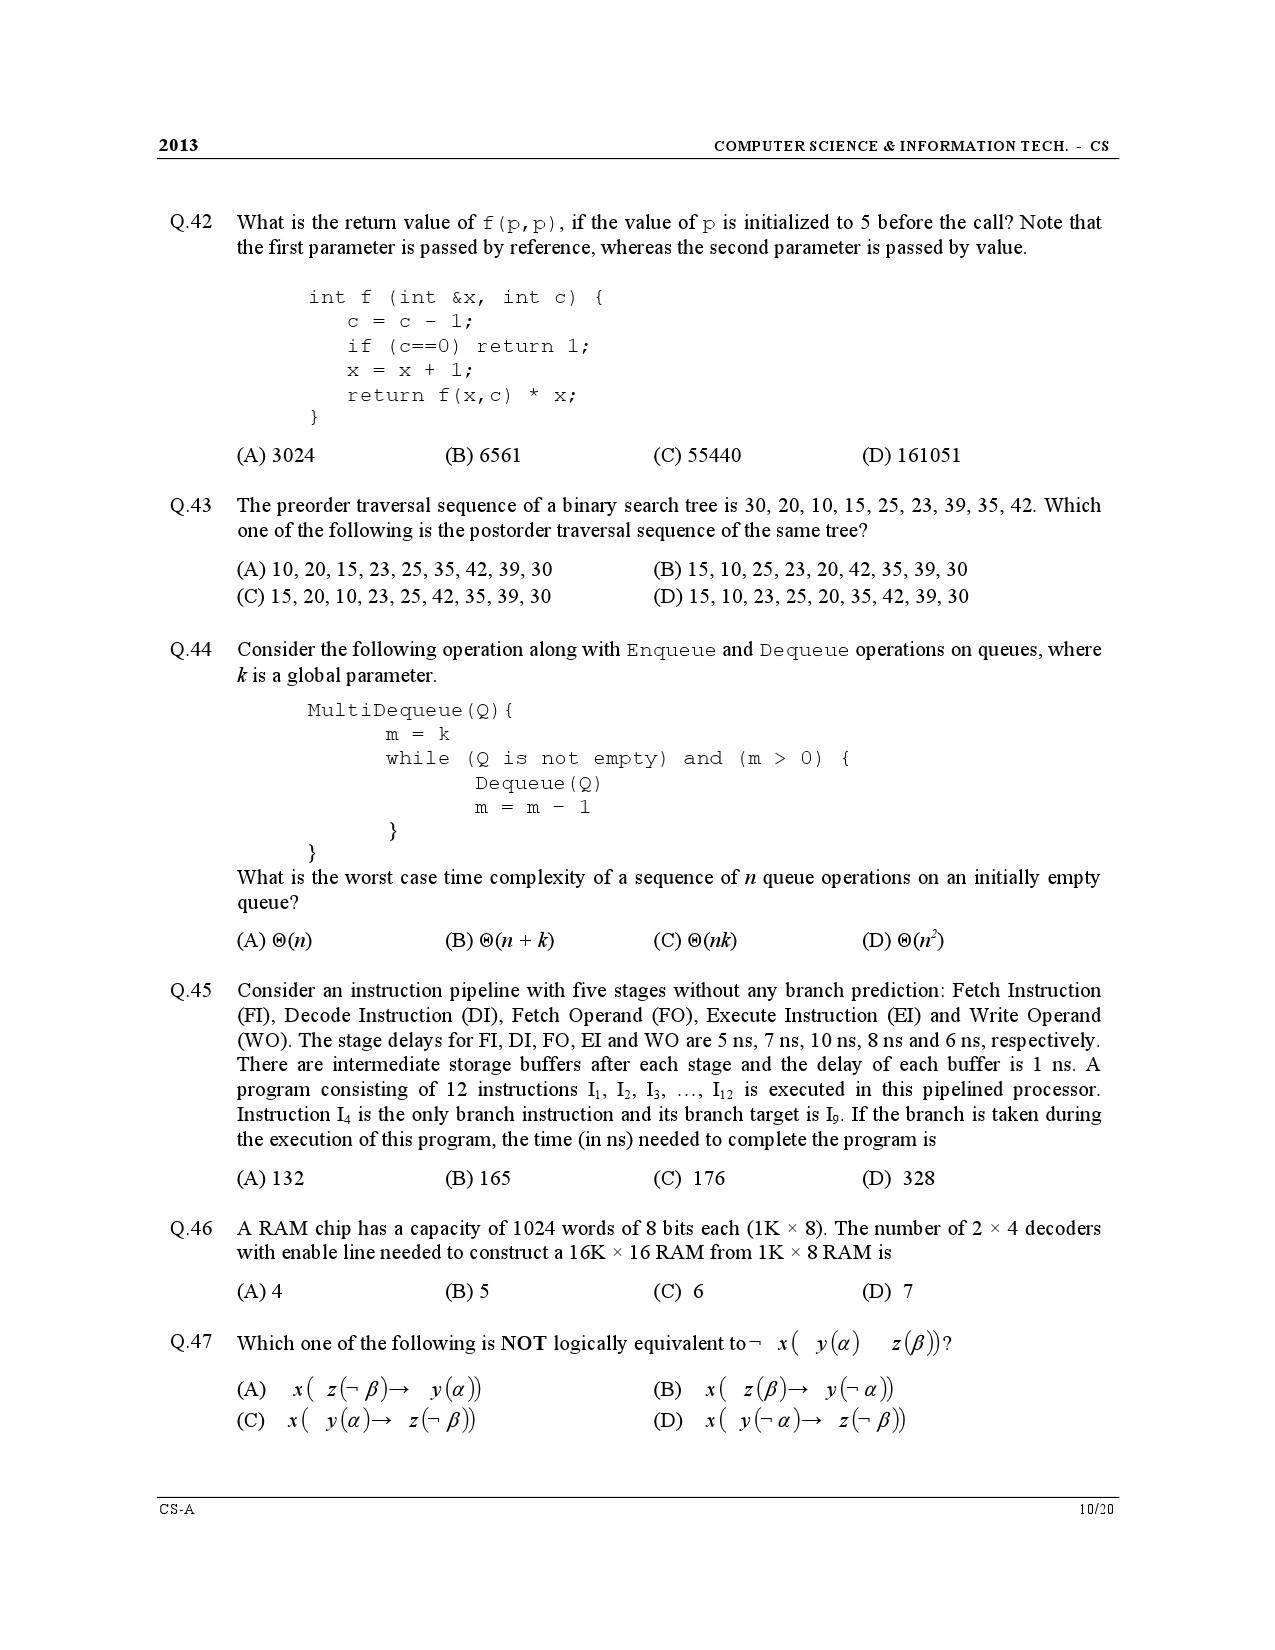 GATE Exam Question Paper 2013 Computer Science and Information Technology 10